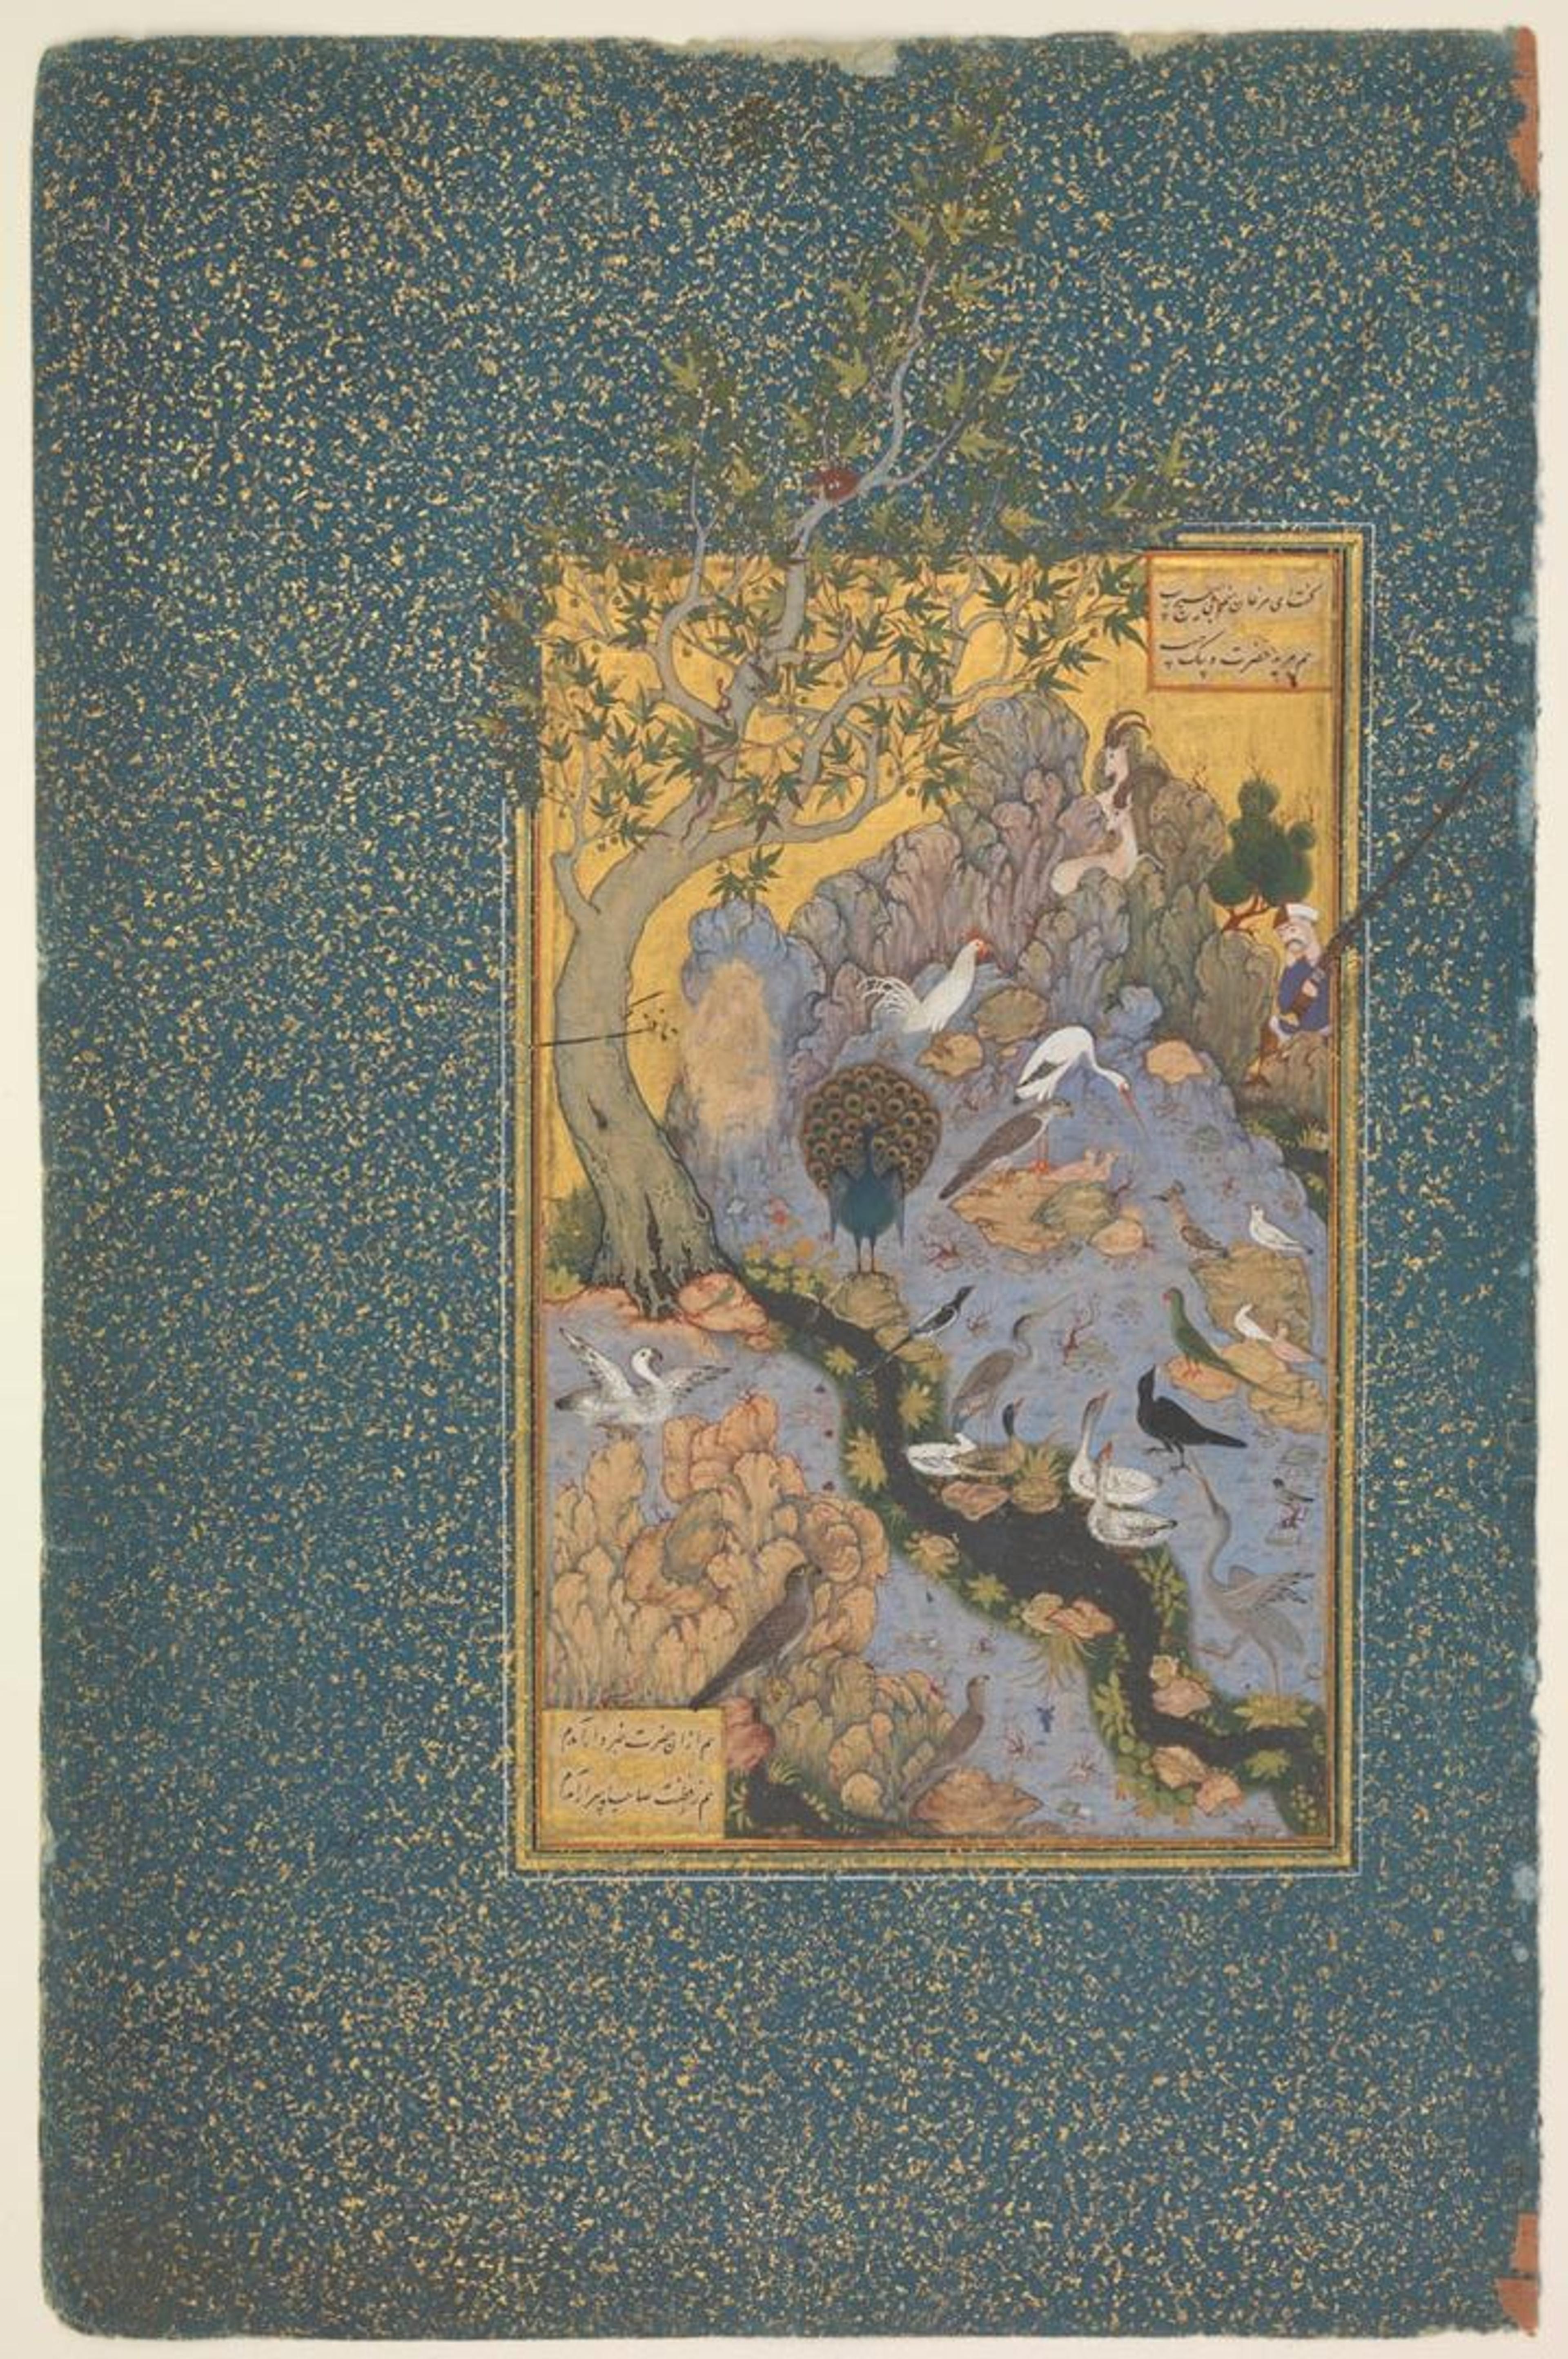 Early 17th-century Iranian work on paper depicting a group of birds